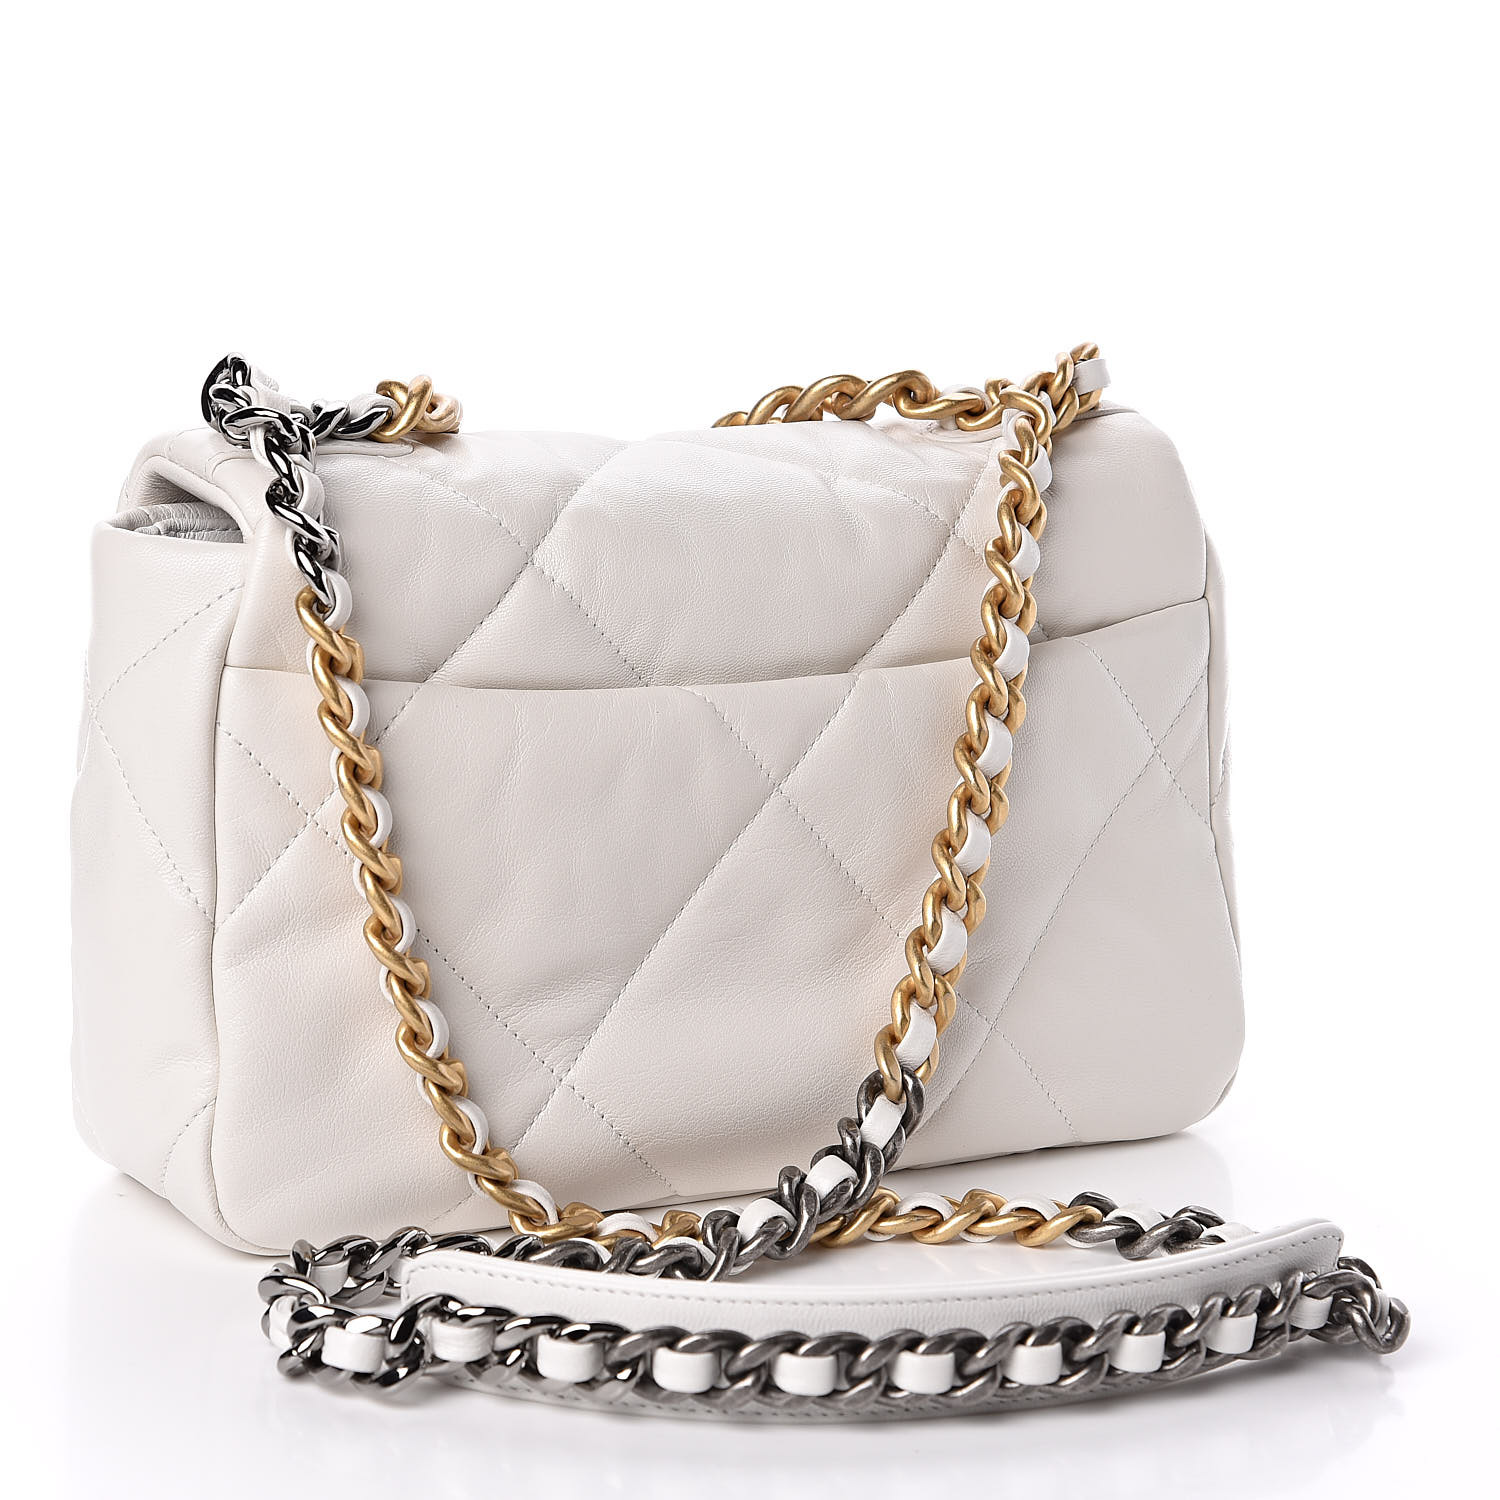 CHANEL Lambskin Quilted Medium Chanel 19 Flap White 507249